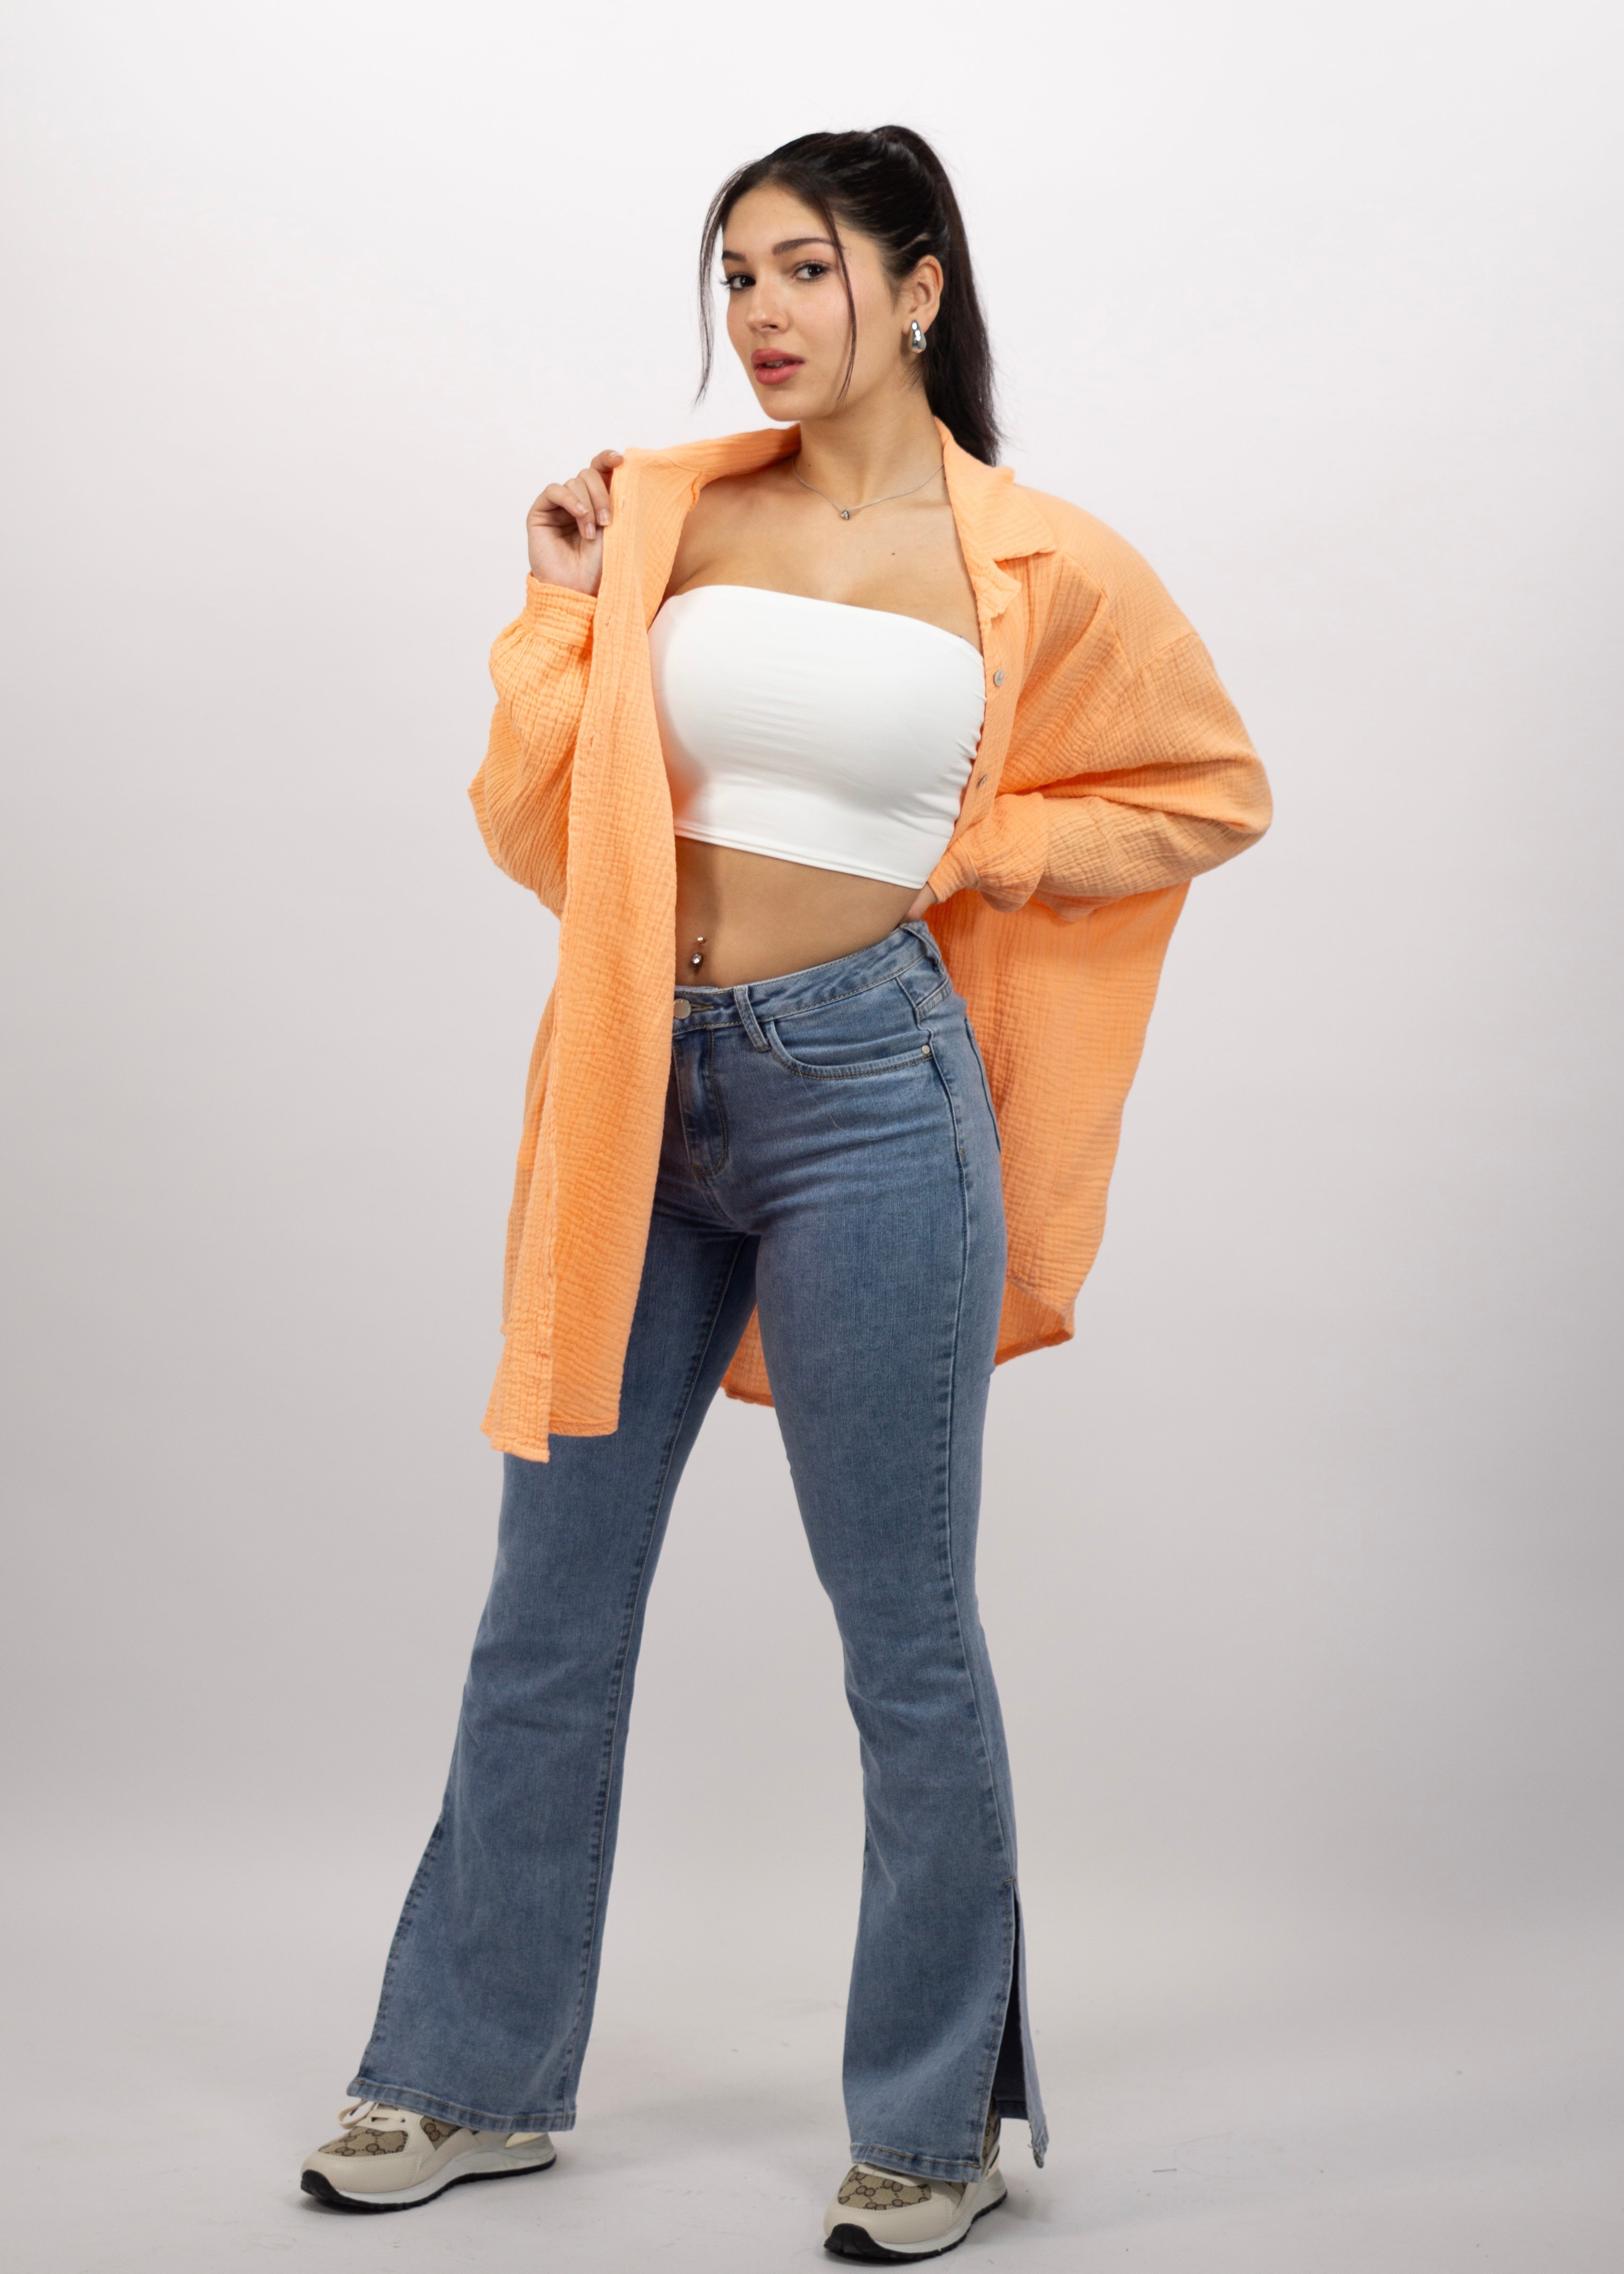 Musselin Bluse "Alissa" Lang Apricot